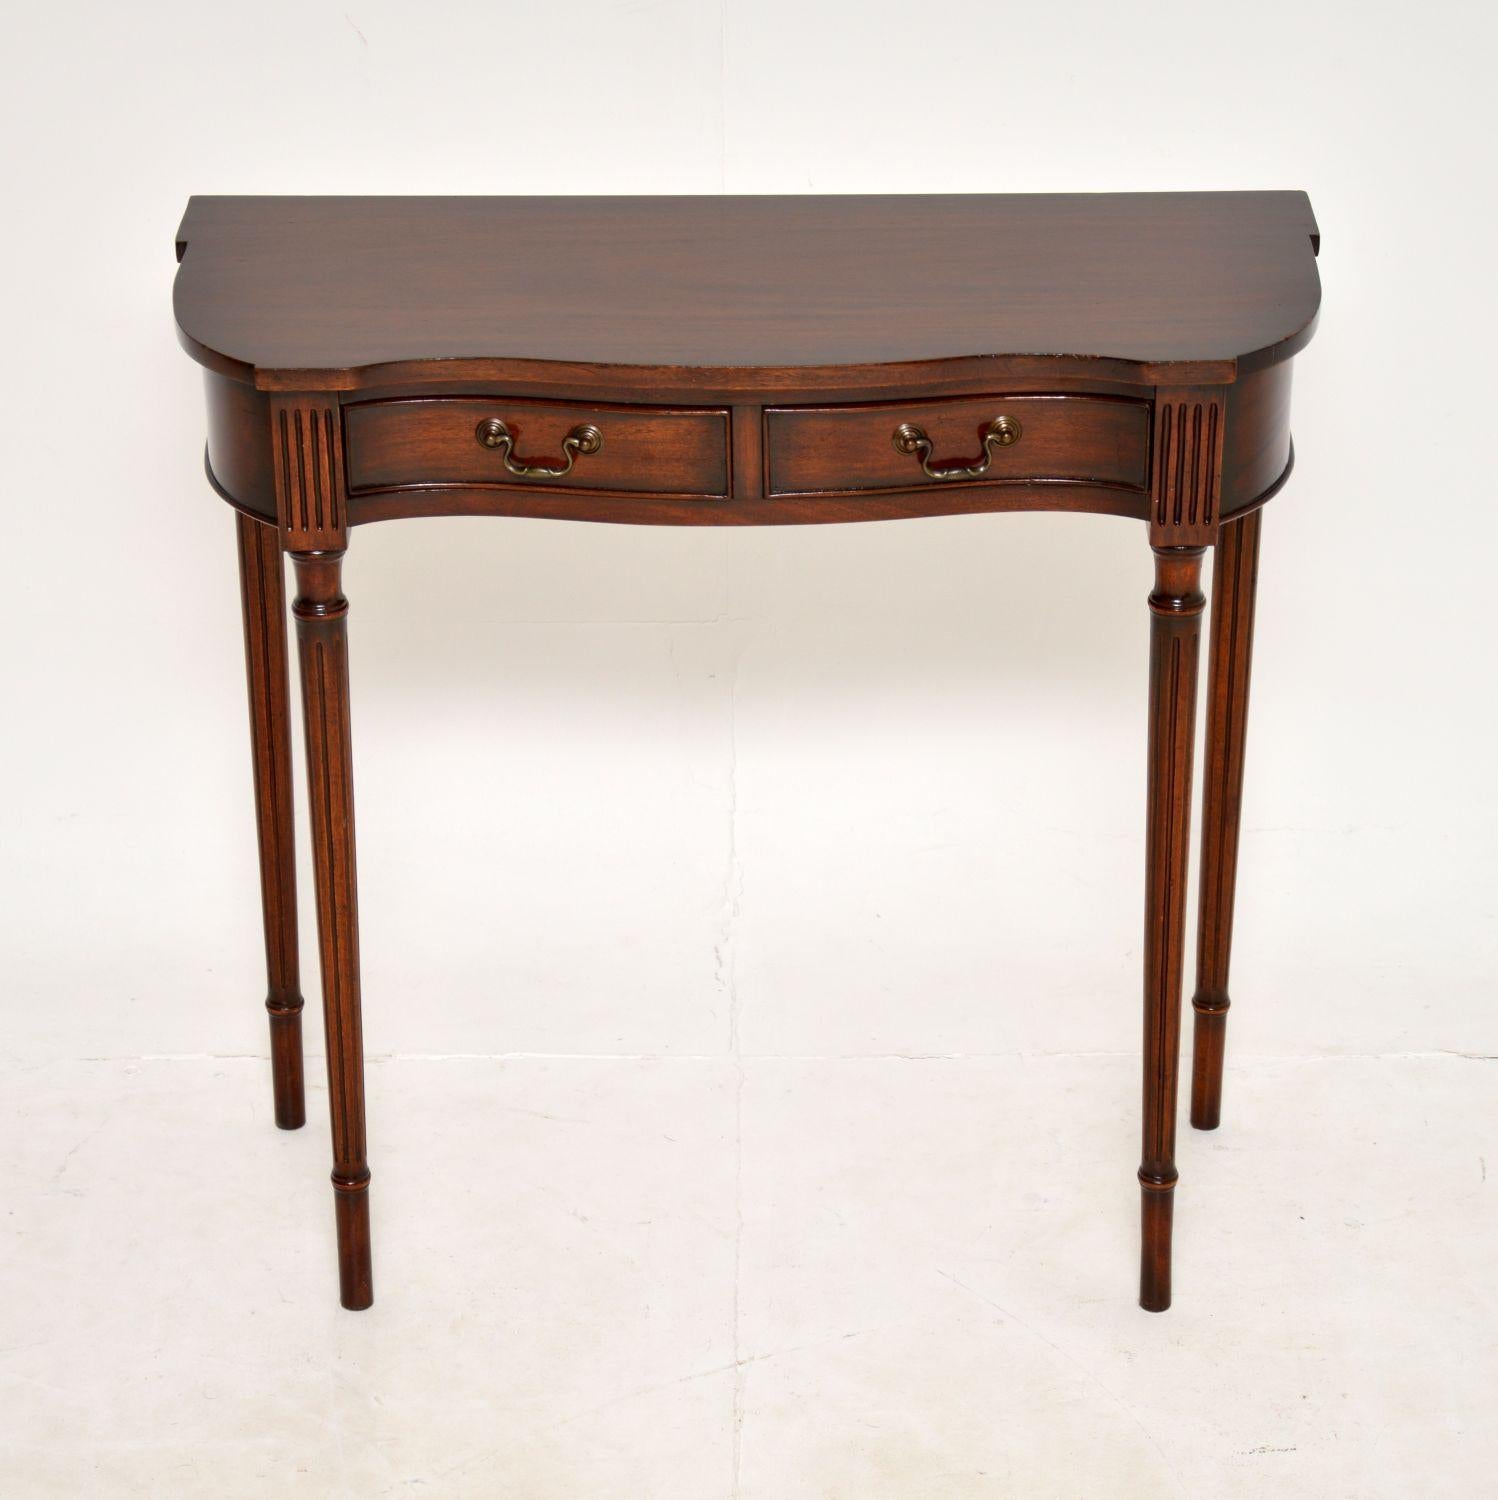 A beautiful and elegant wood console table in the antique Regency style. This was made in England, it dates from around the 1950’s period.

The quality is excellent and this has a lovely, compact and stylish design. The front has a serpentine